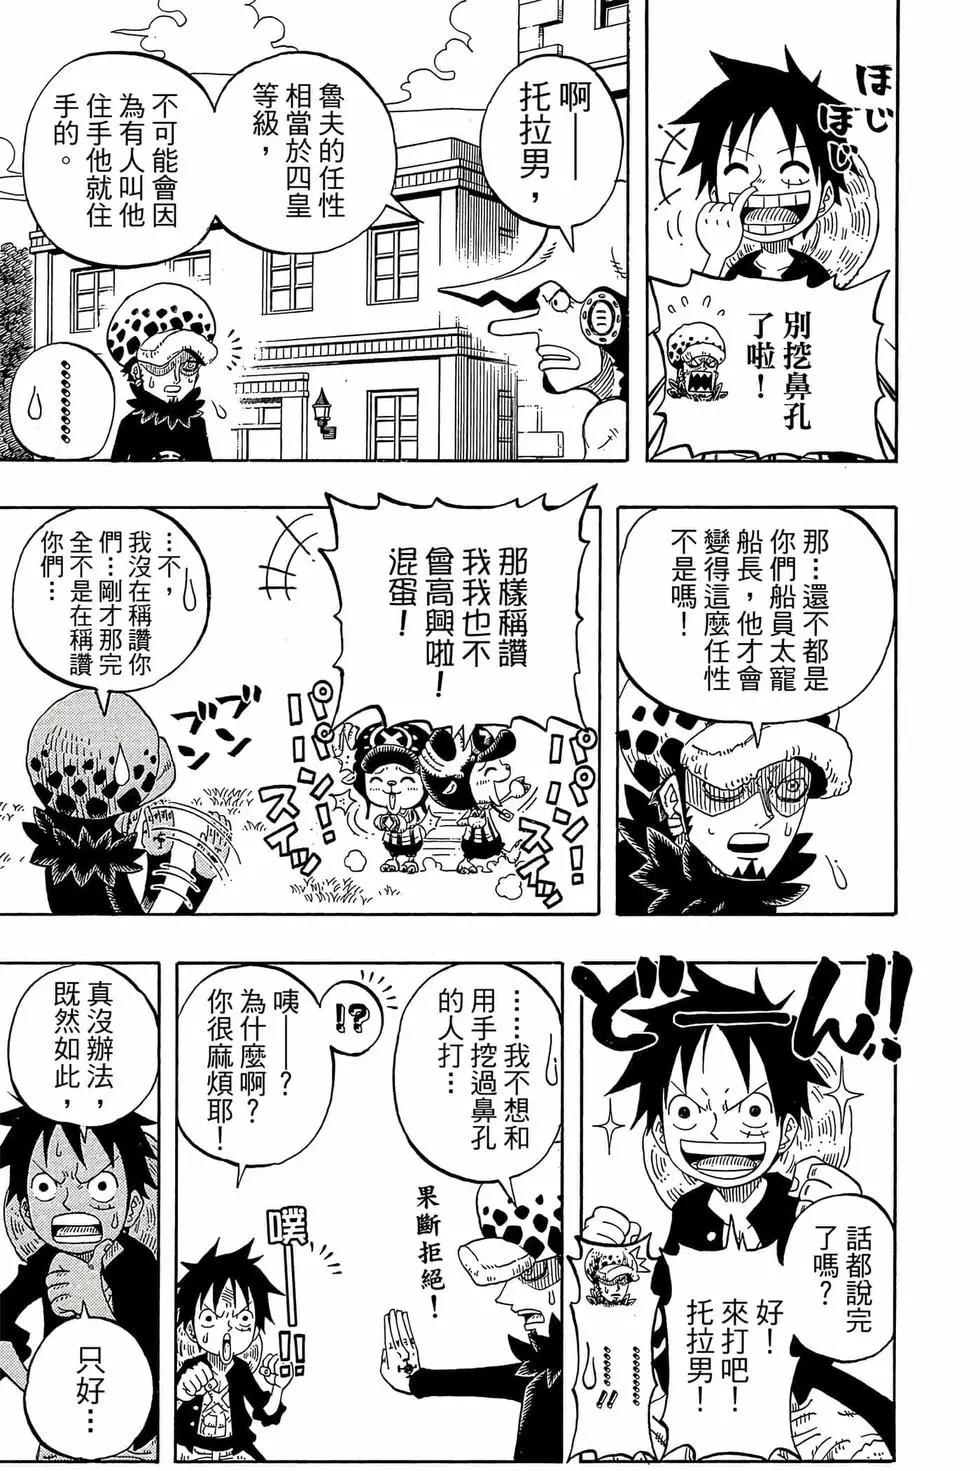 One piece party - 第01卷(1/4) - 4